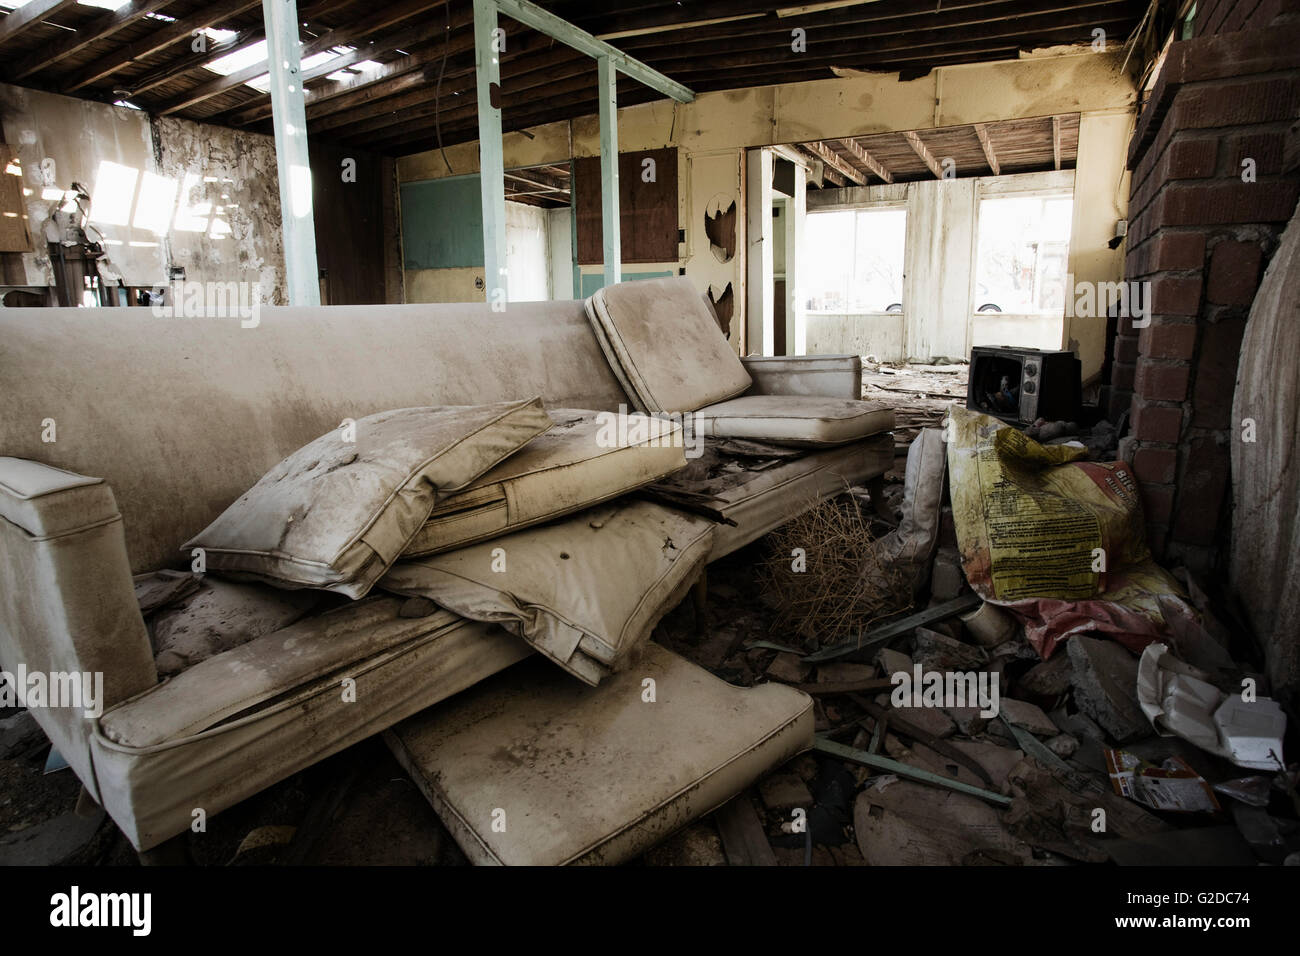 Dirty Old Couch in an Abandoned House Stock Photo